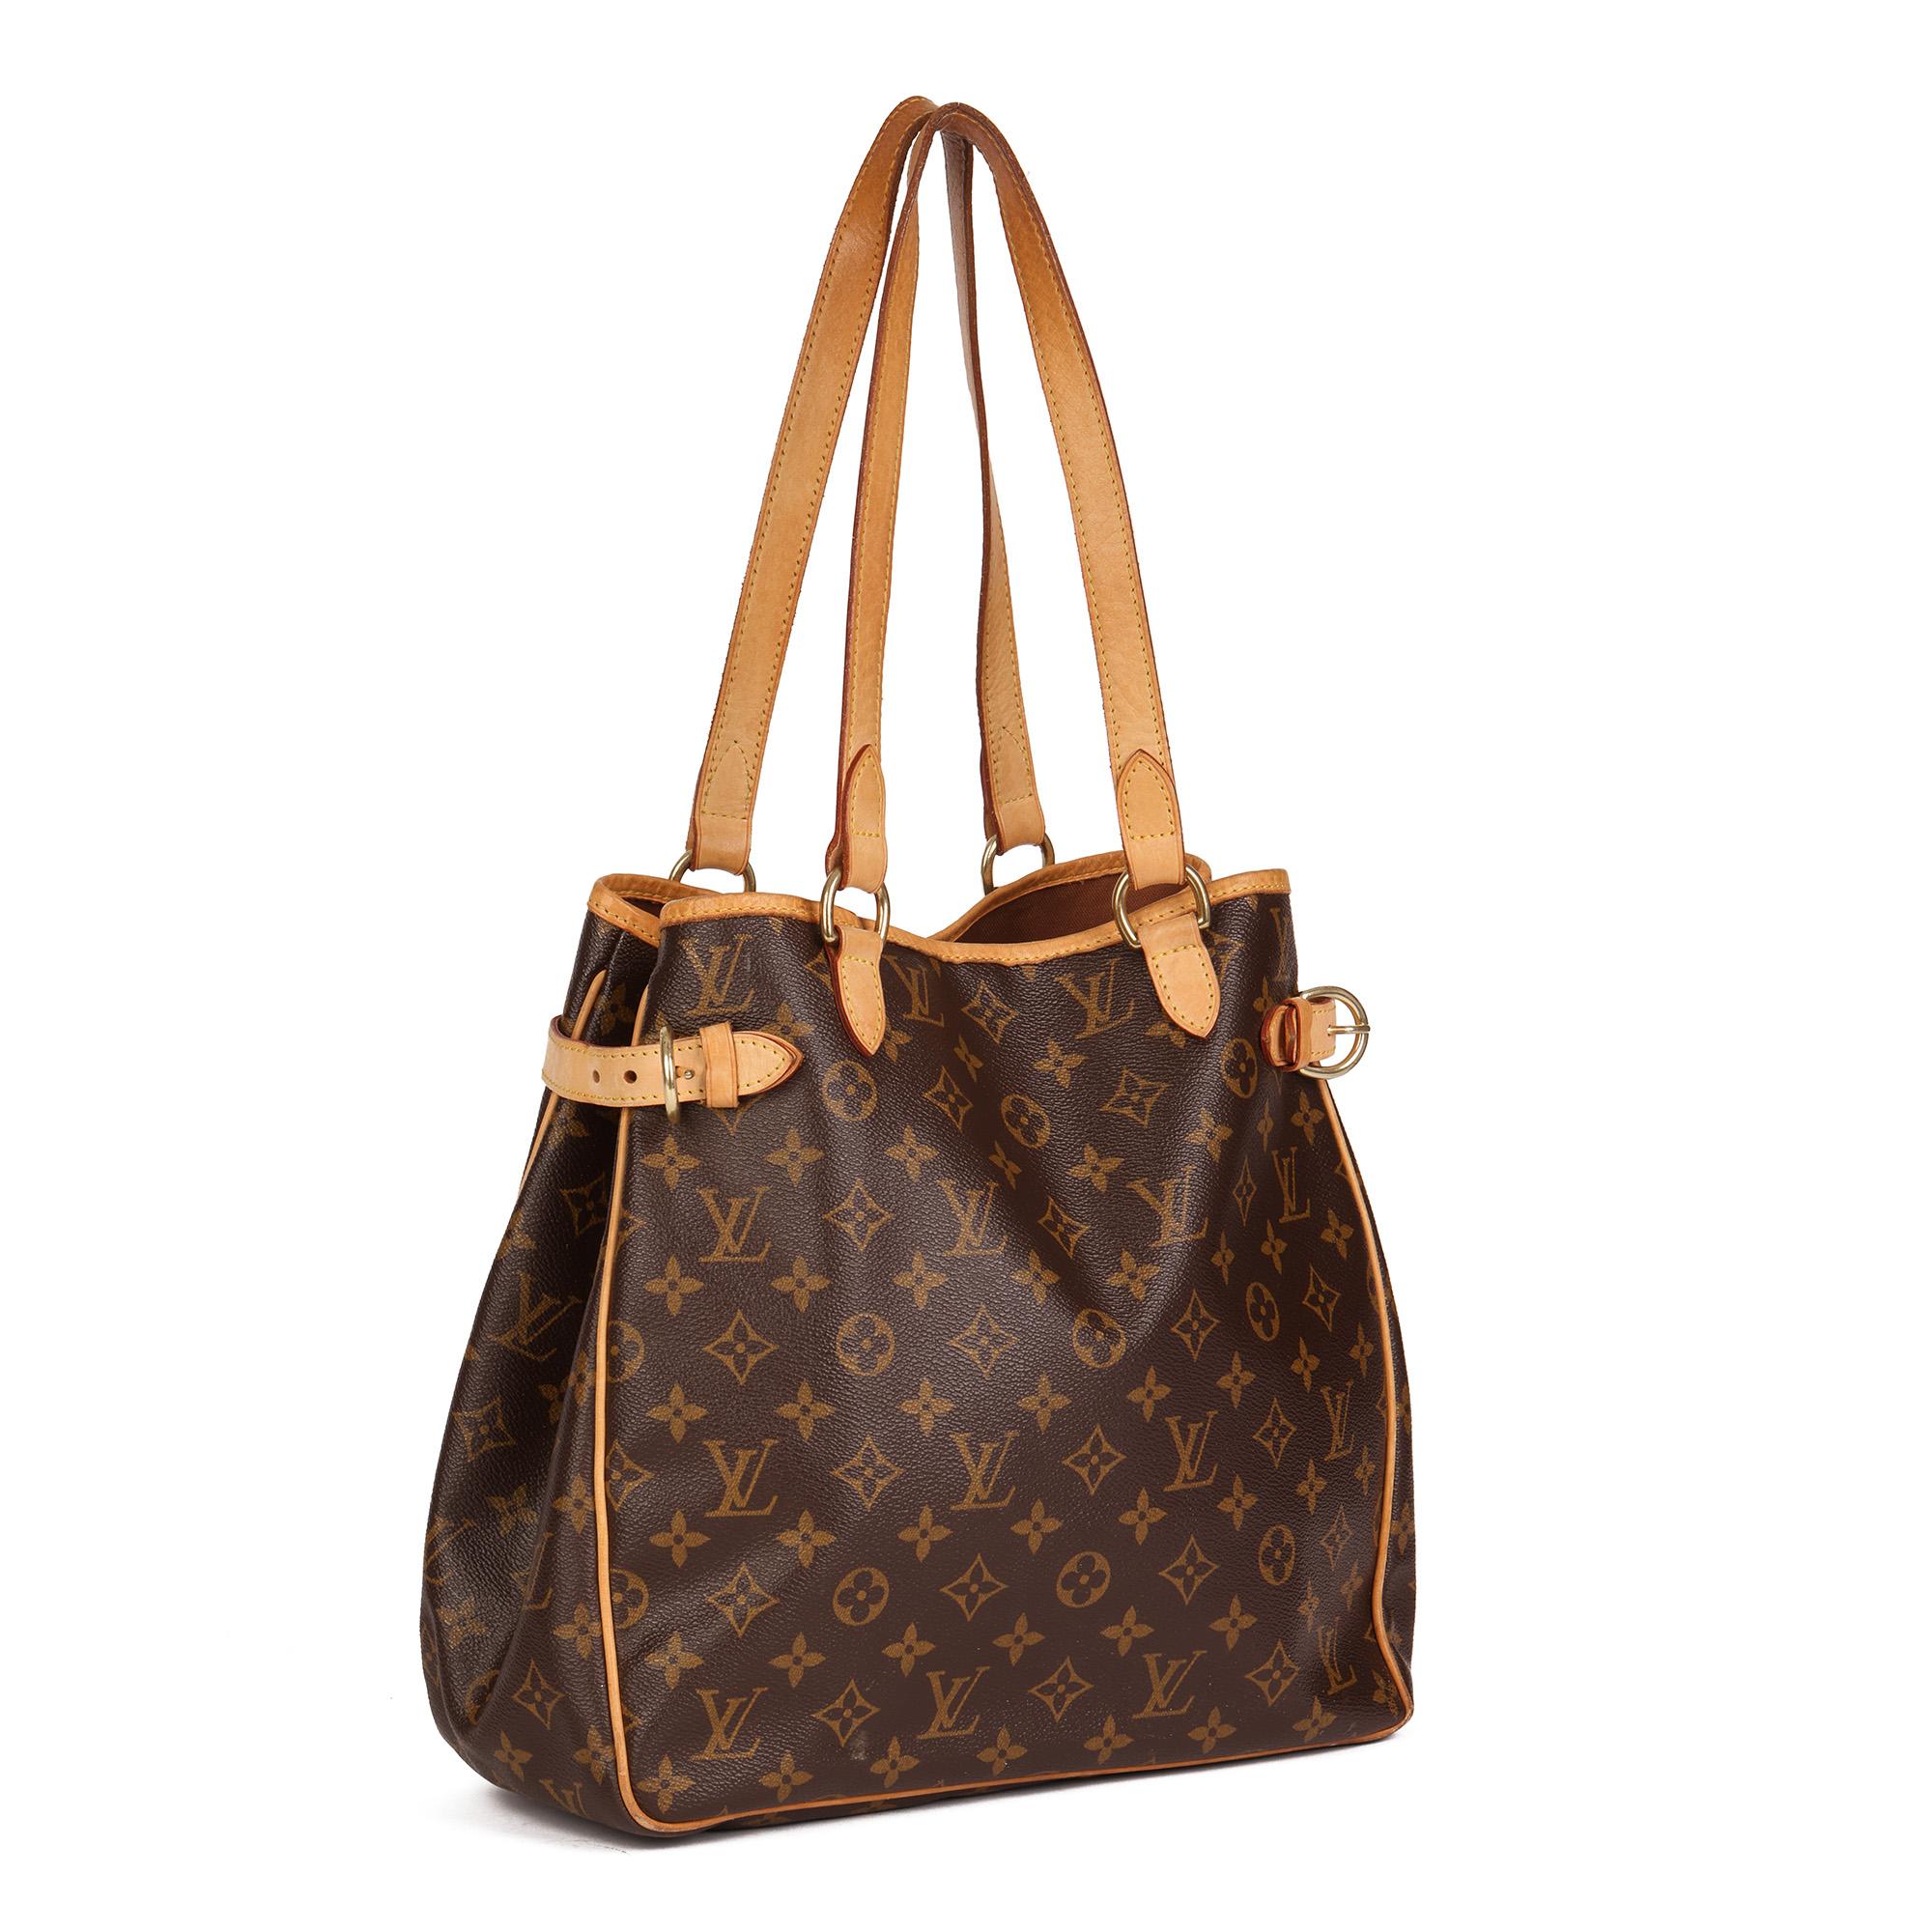 LOUIS VUITTON
Brown Monogram Coated Canvas & Vachetta Leather Batignolles Vertical

Xupes Reference: CB546
Serial Number: MI0036
Age (Circa): 2006
Authenticity Details: Date Stamp (Made in France)
Gender: Ladies
Type: Tote, Shoulder

Colour: